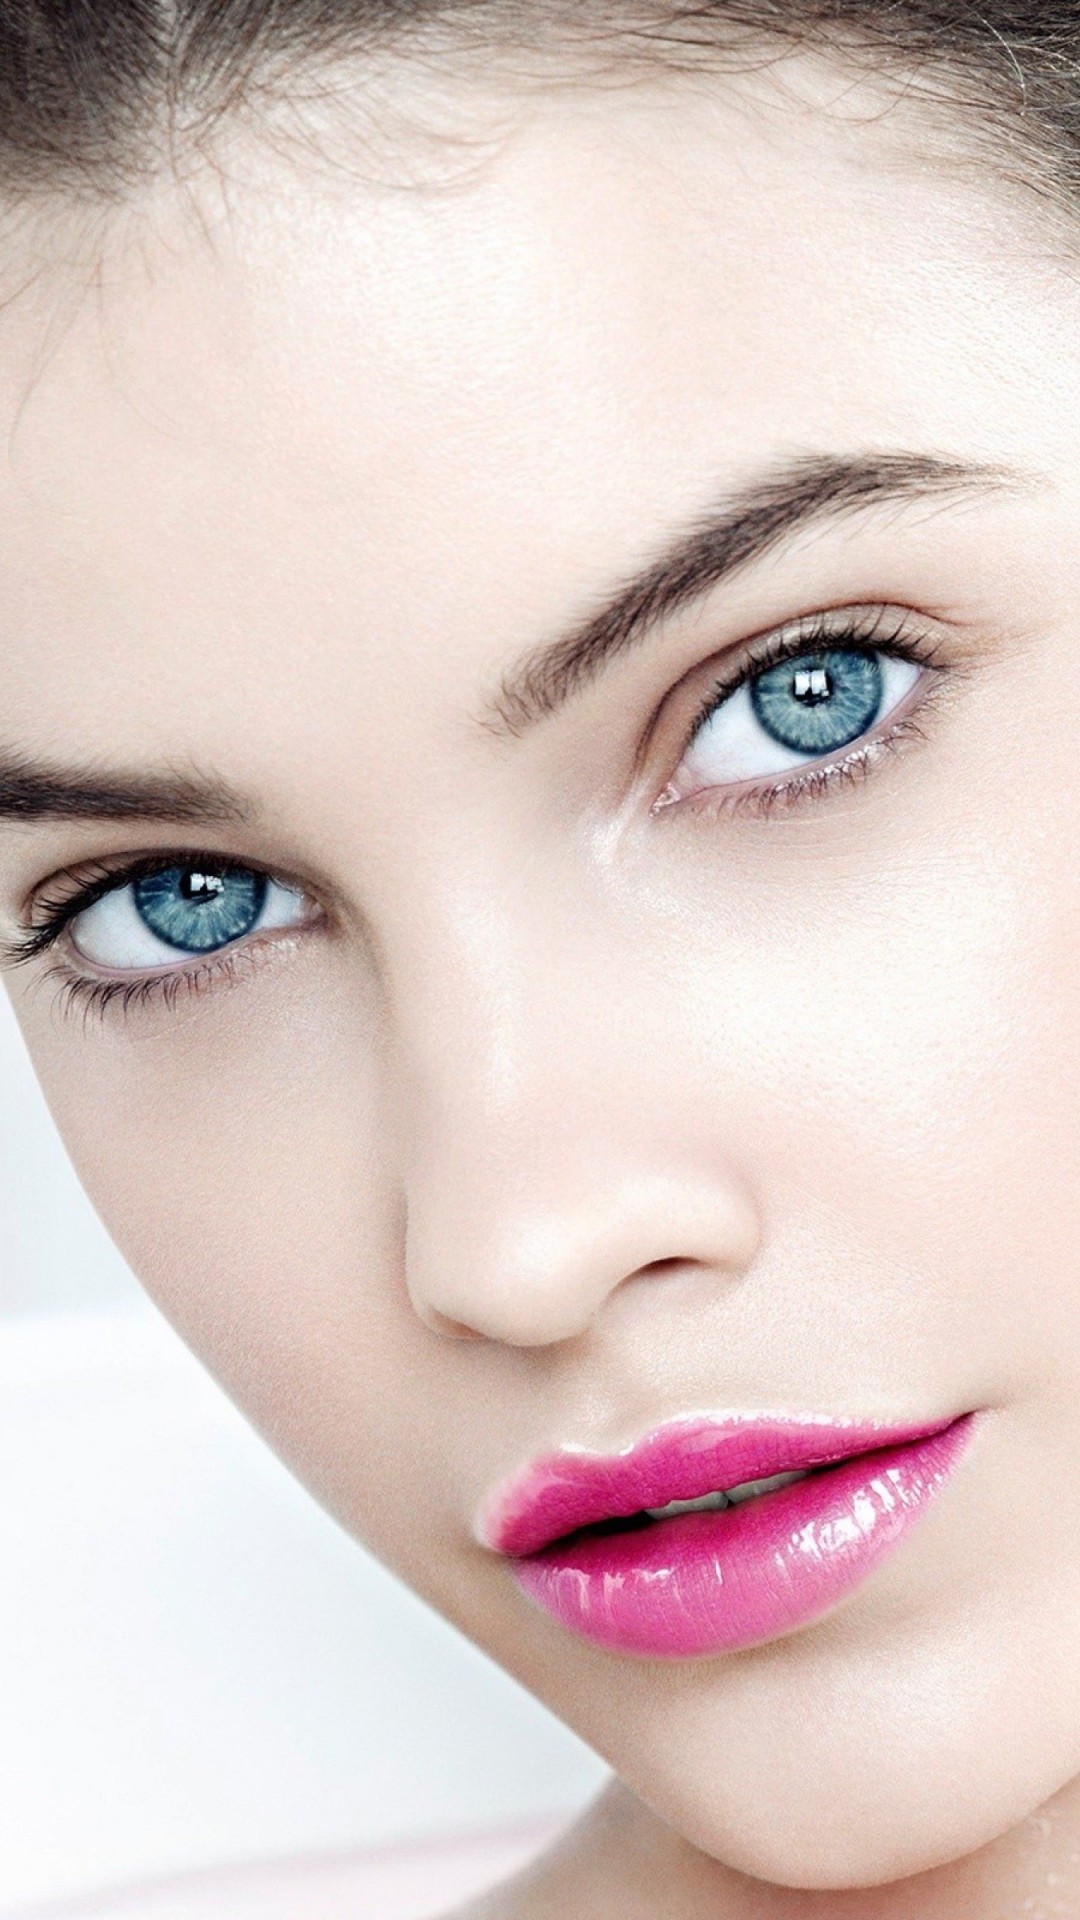 Barbara Palvin Wallpaper for HTC One